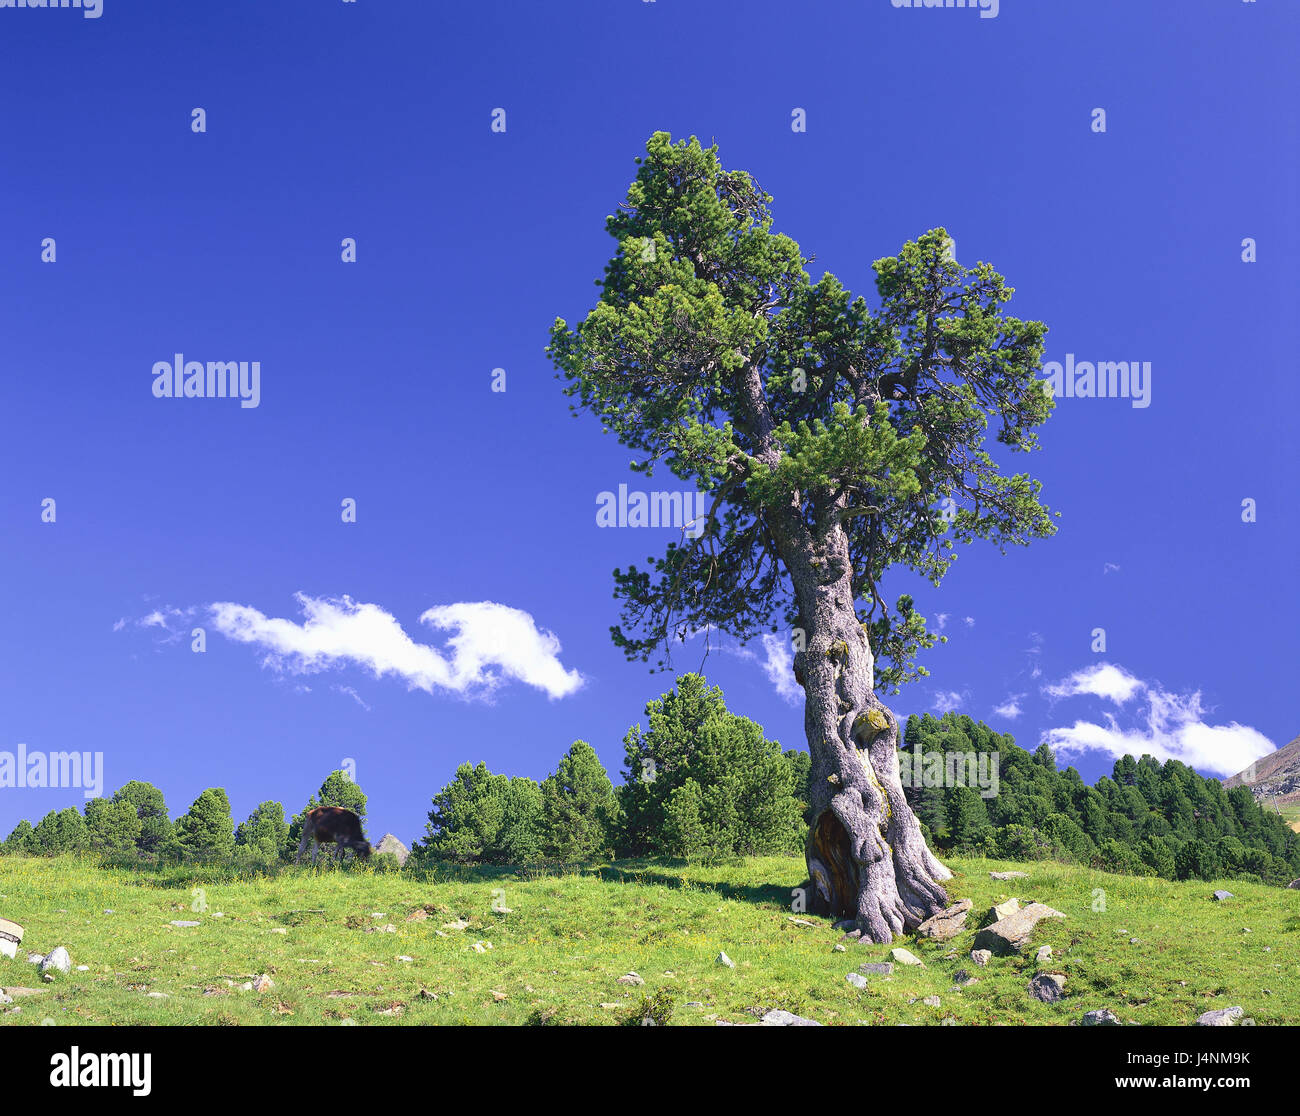 Meadow, Swiss pine, Pinus cembra, scenery, nature, plants, outside, deserted, sky, blue, clouds, shrubs, trees, Stock Photo